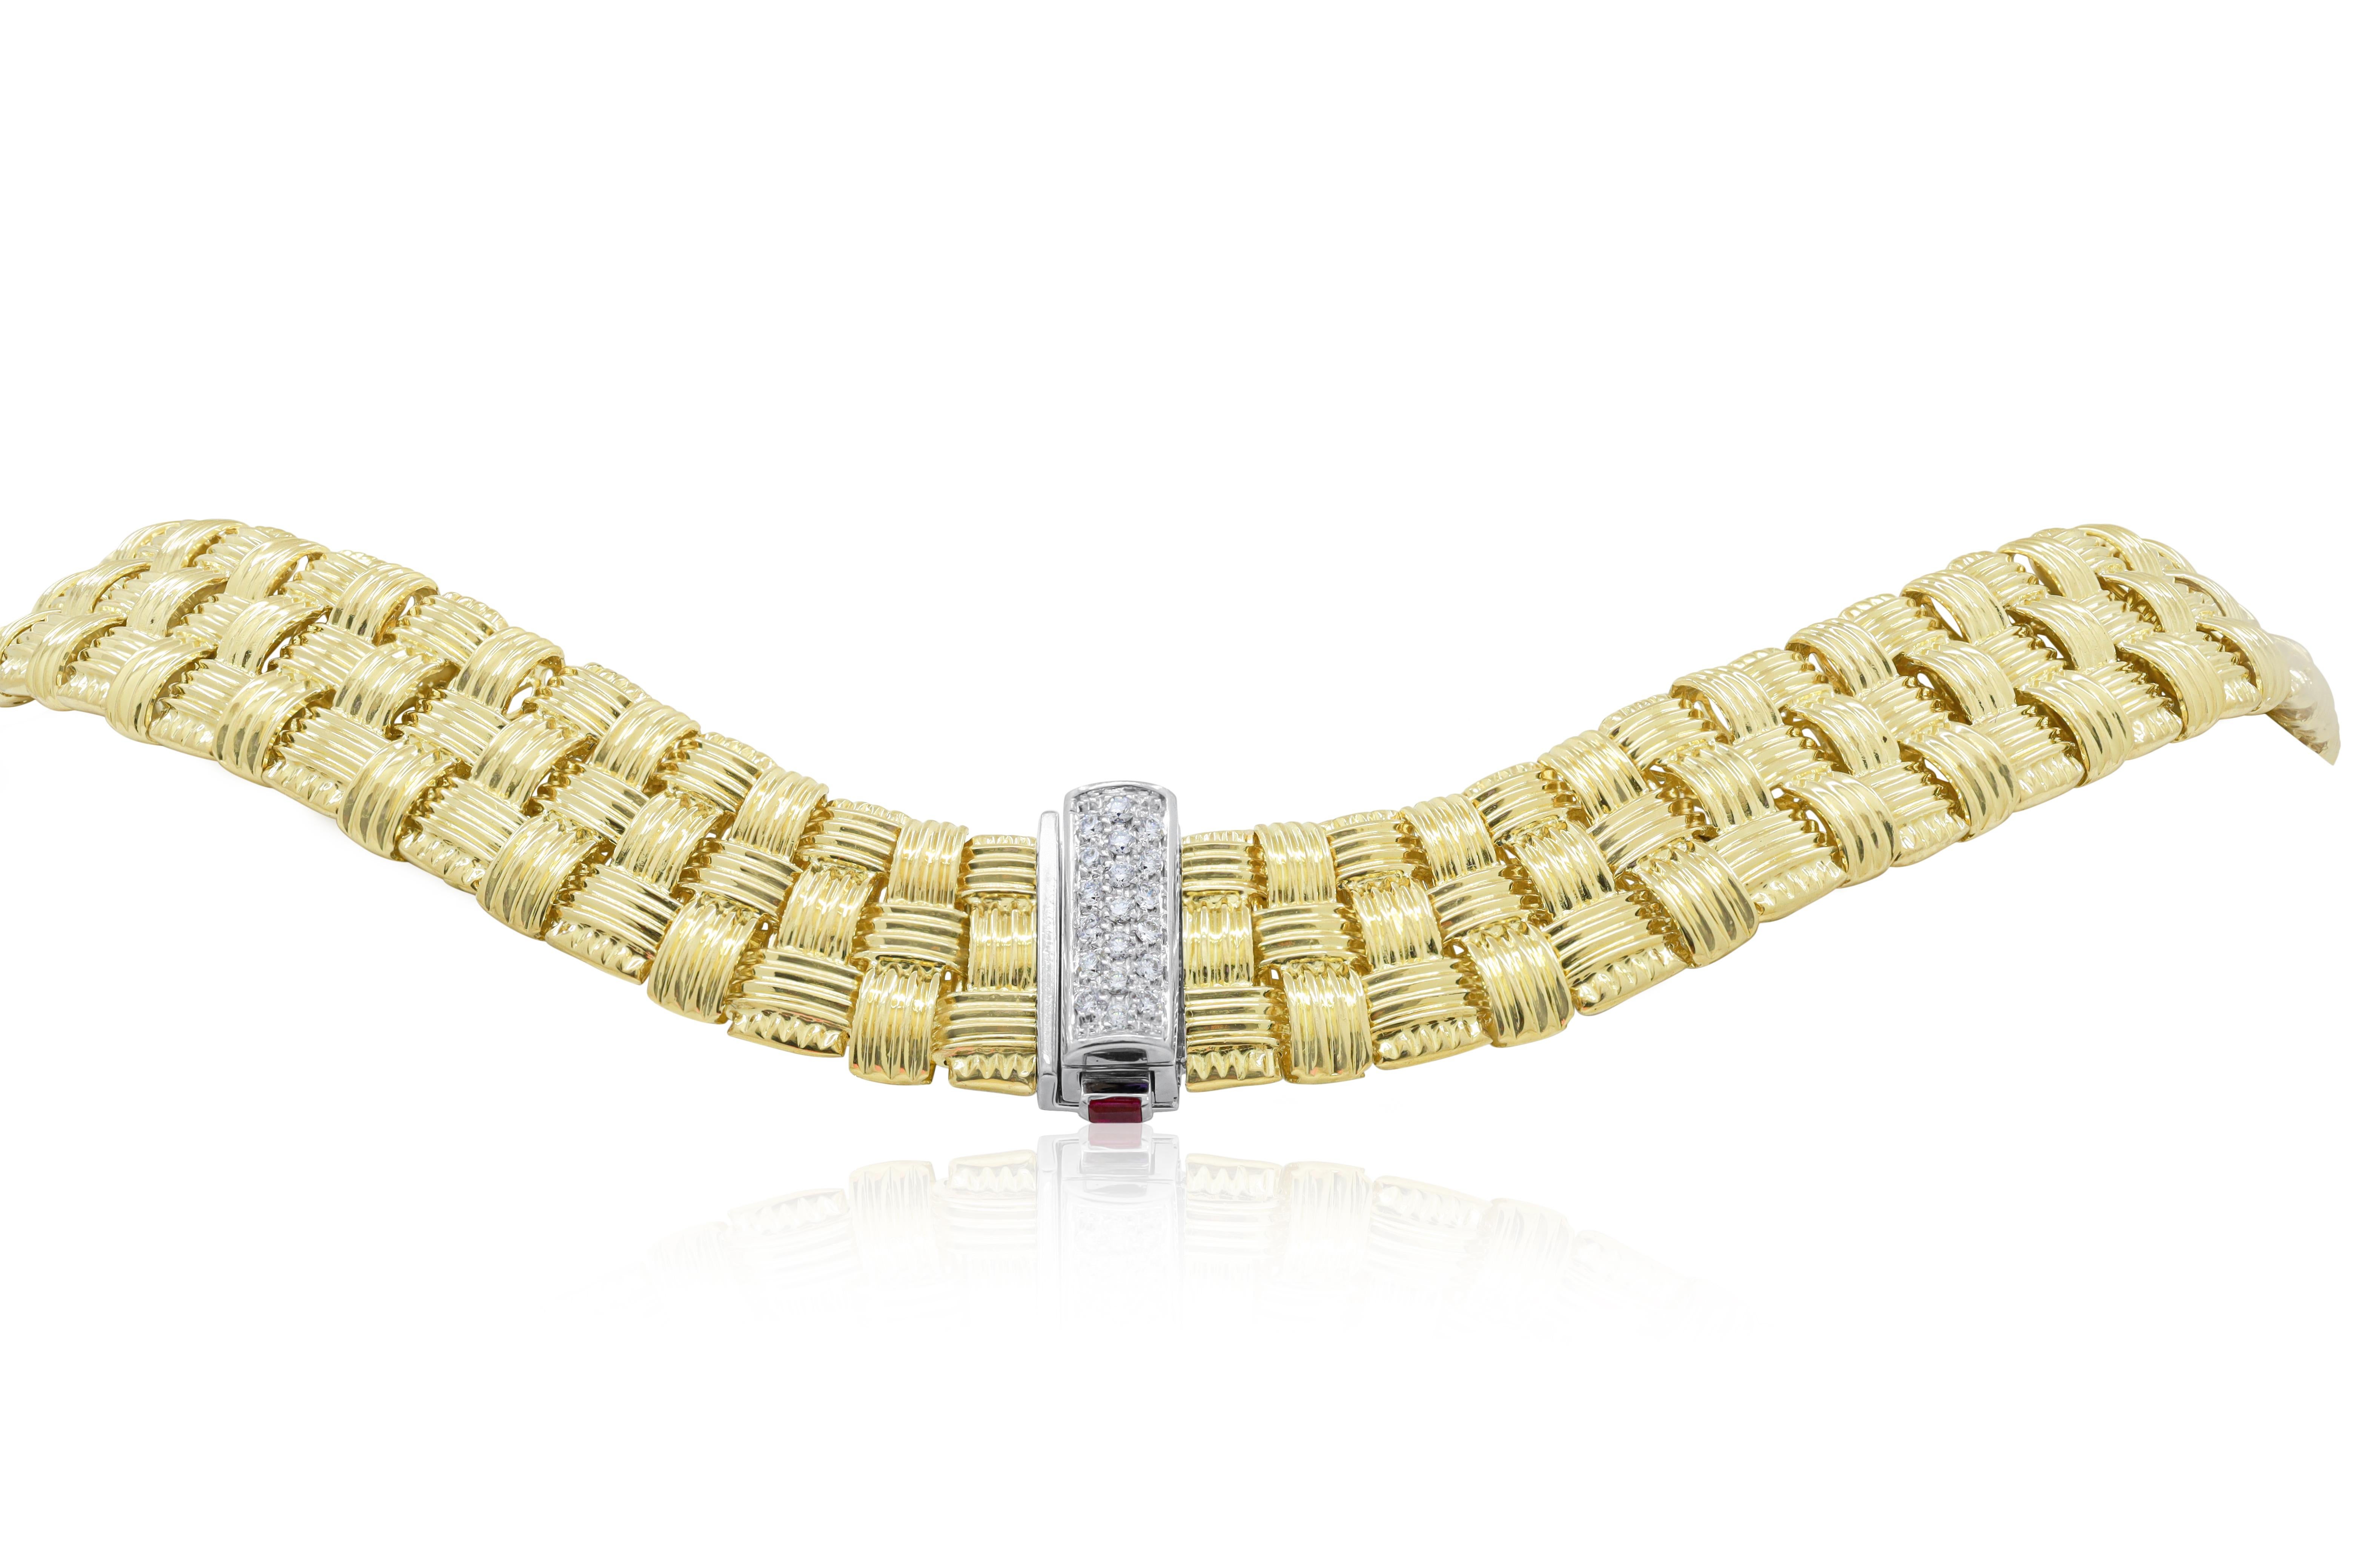 18KT roberto coin necklace with woven design 115.38 grams and .50cts on diamonds all yellow gold
Diana M. is a leading supplier of top-quality fine jewelry for over 35 years.
Diana M is one-stop shop for all your jewelry shopping, carrying line of